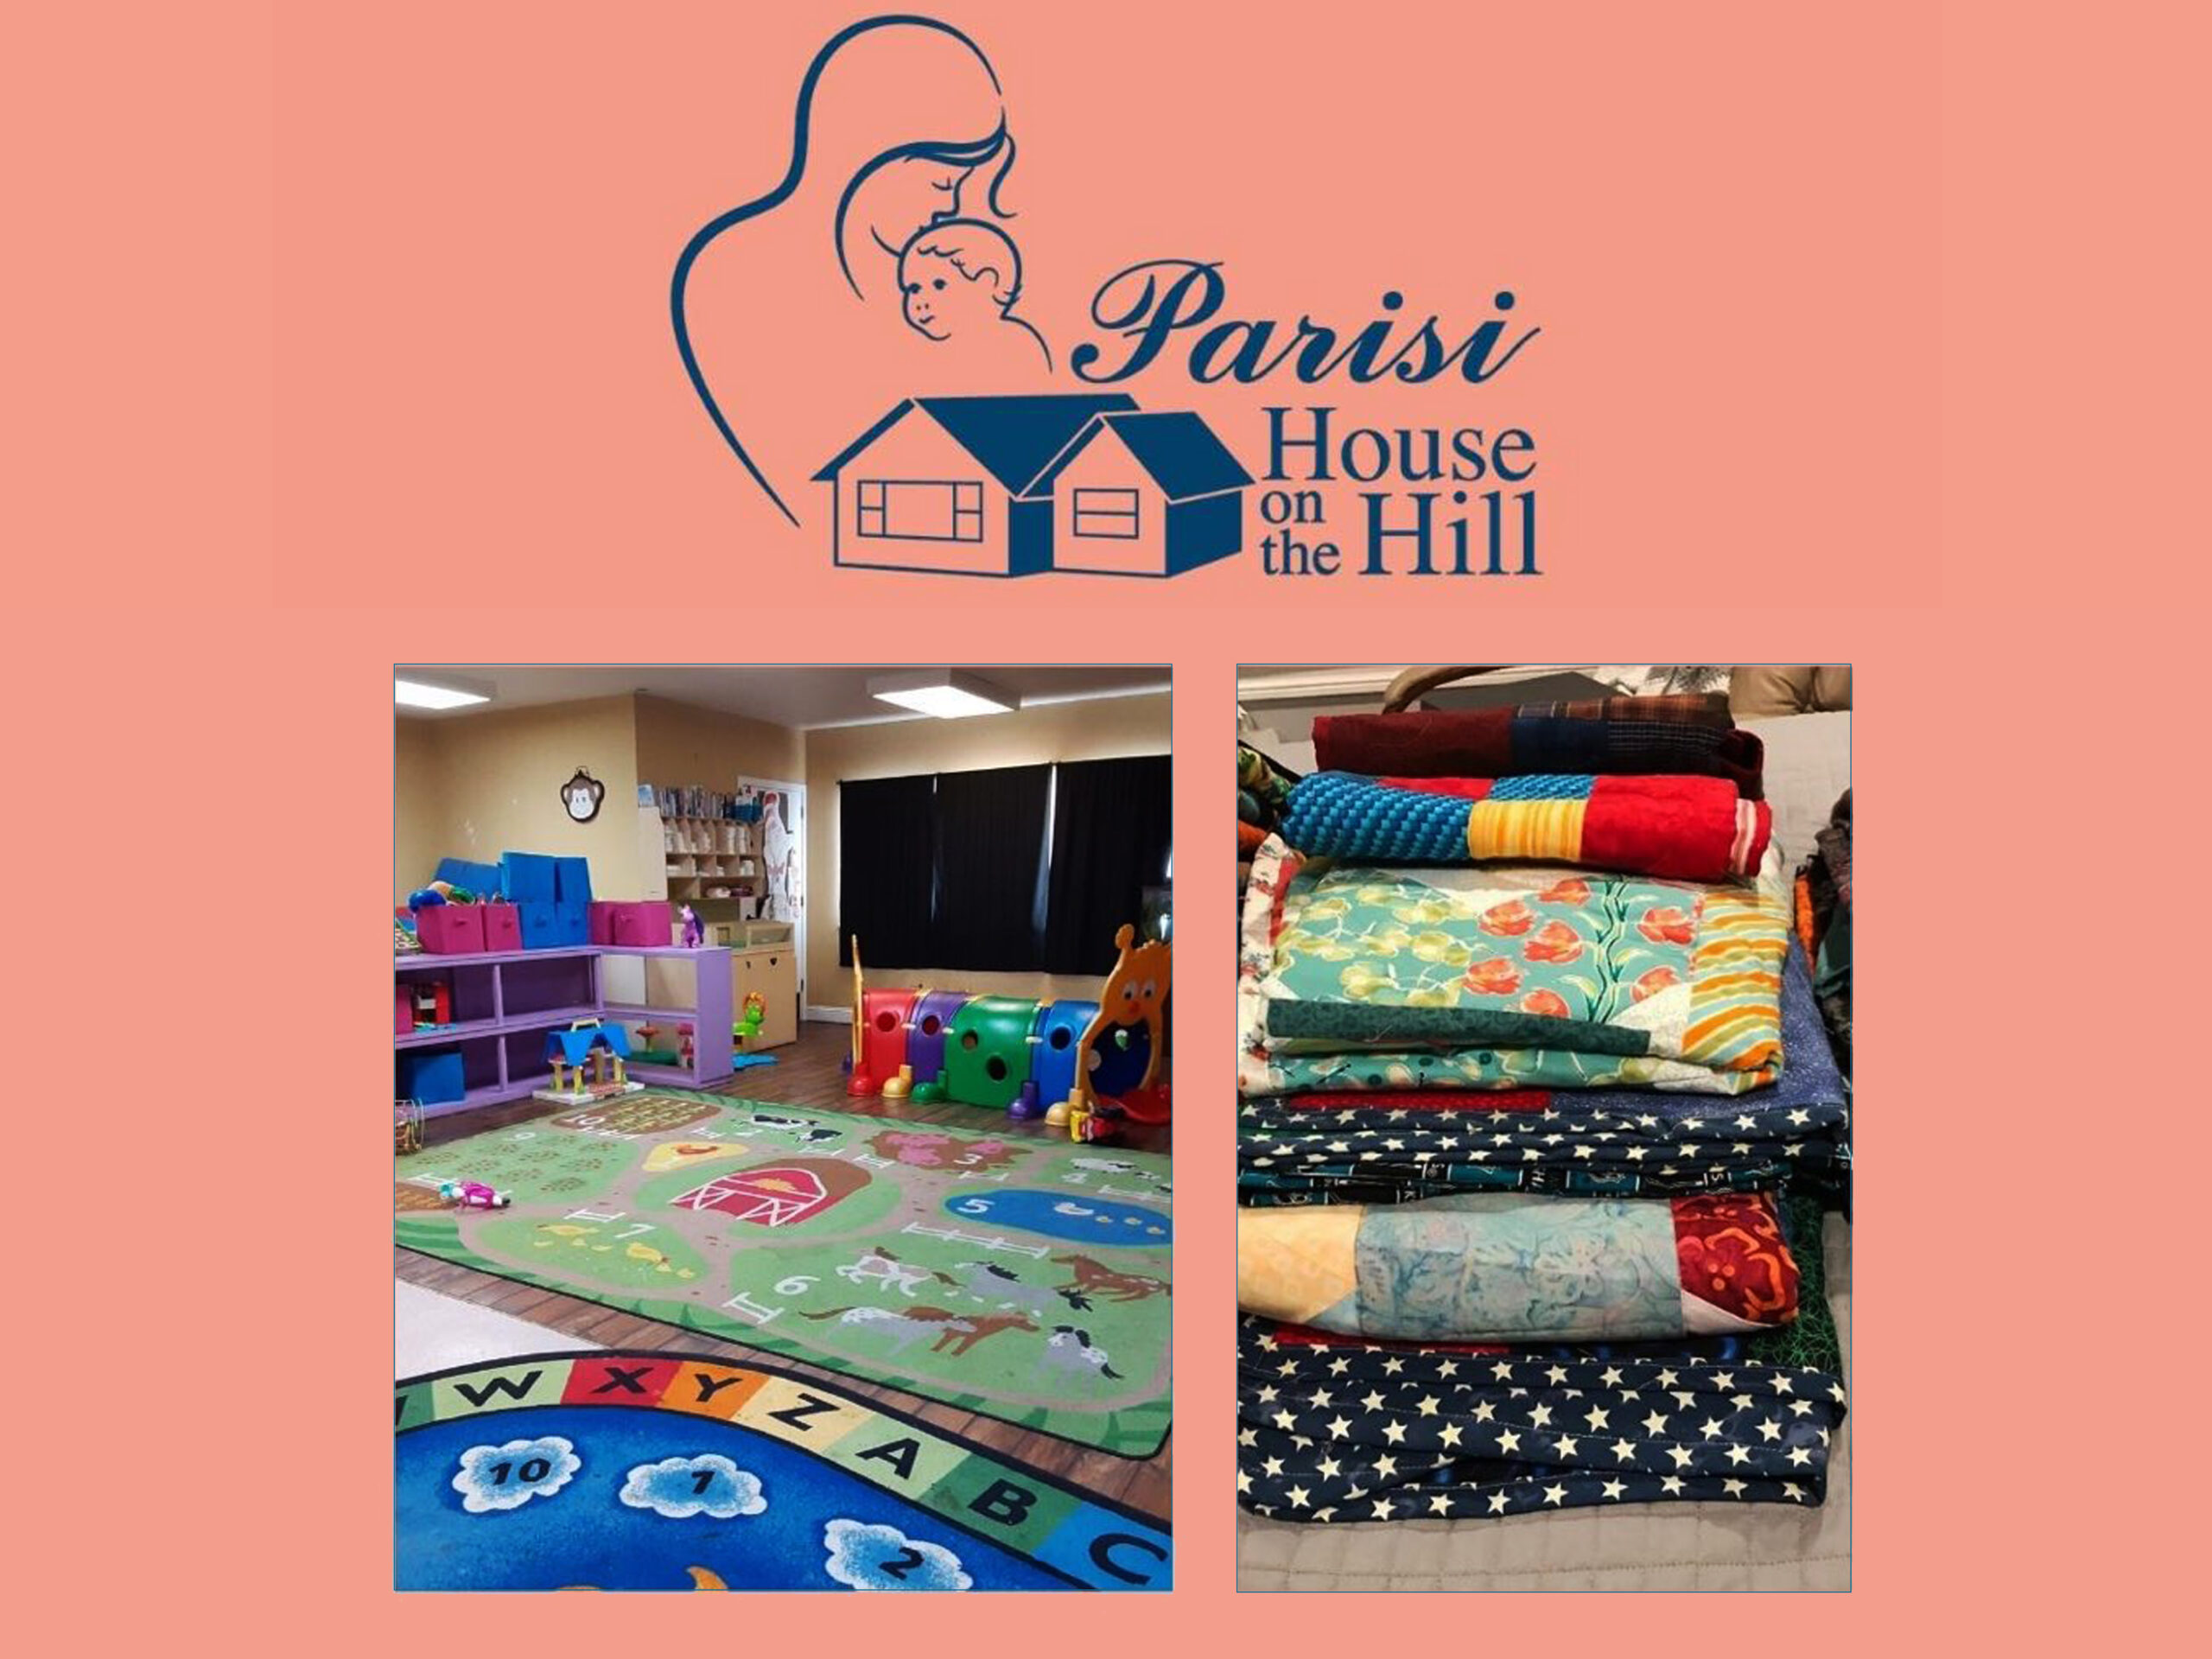 Donations for Parisi House on the Hill